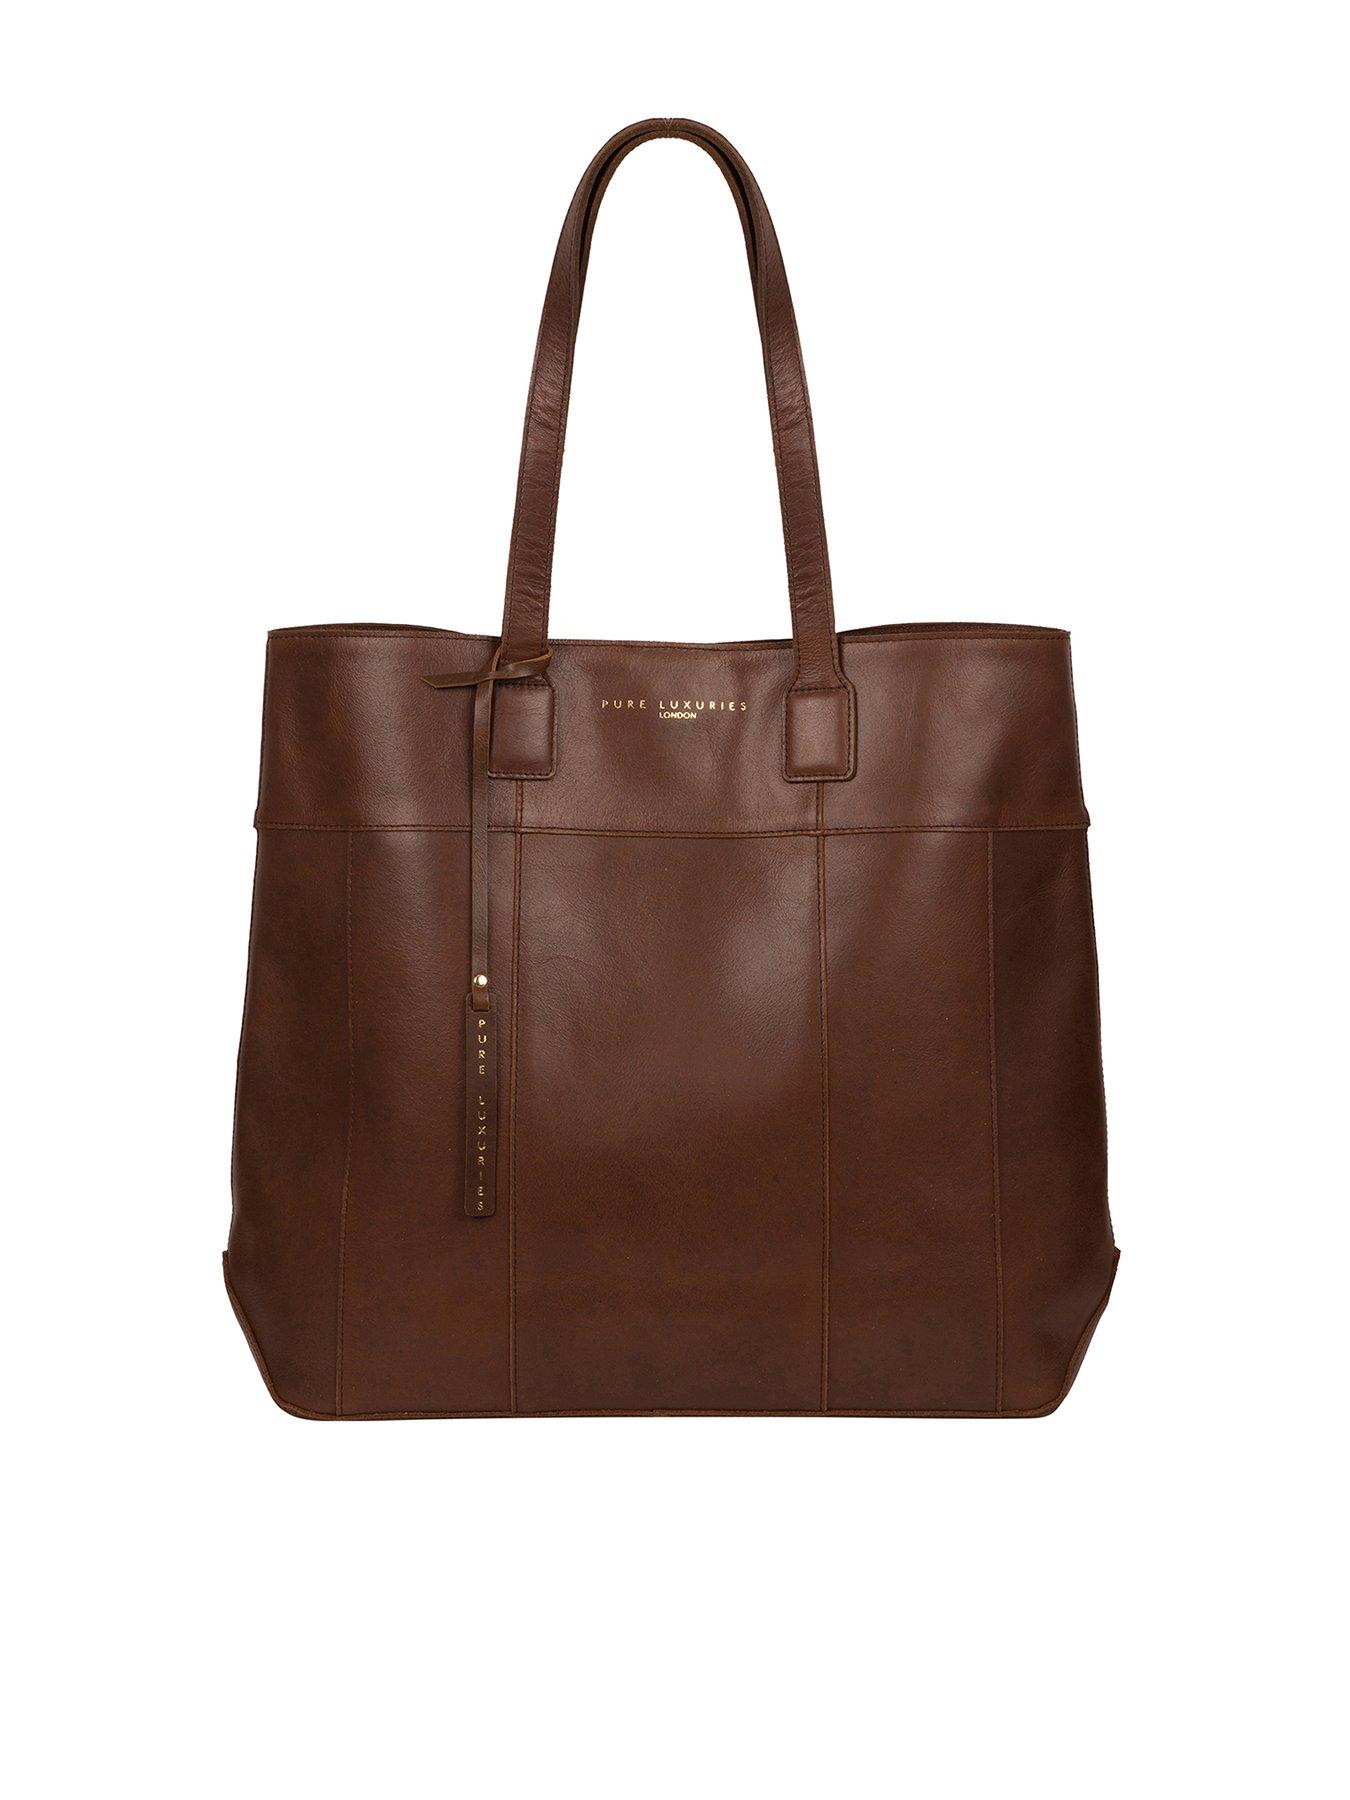 Details about   Shades Of Chocolate Leather Purse 